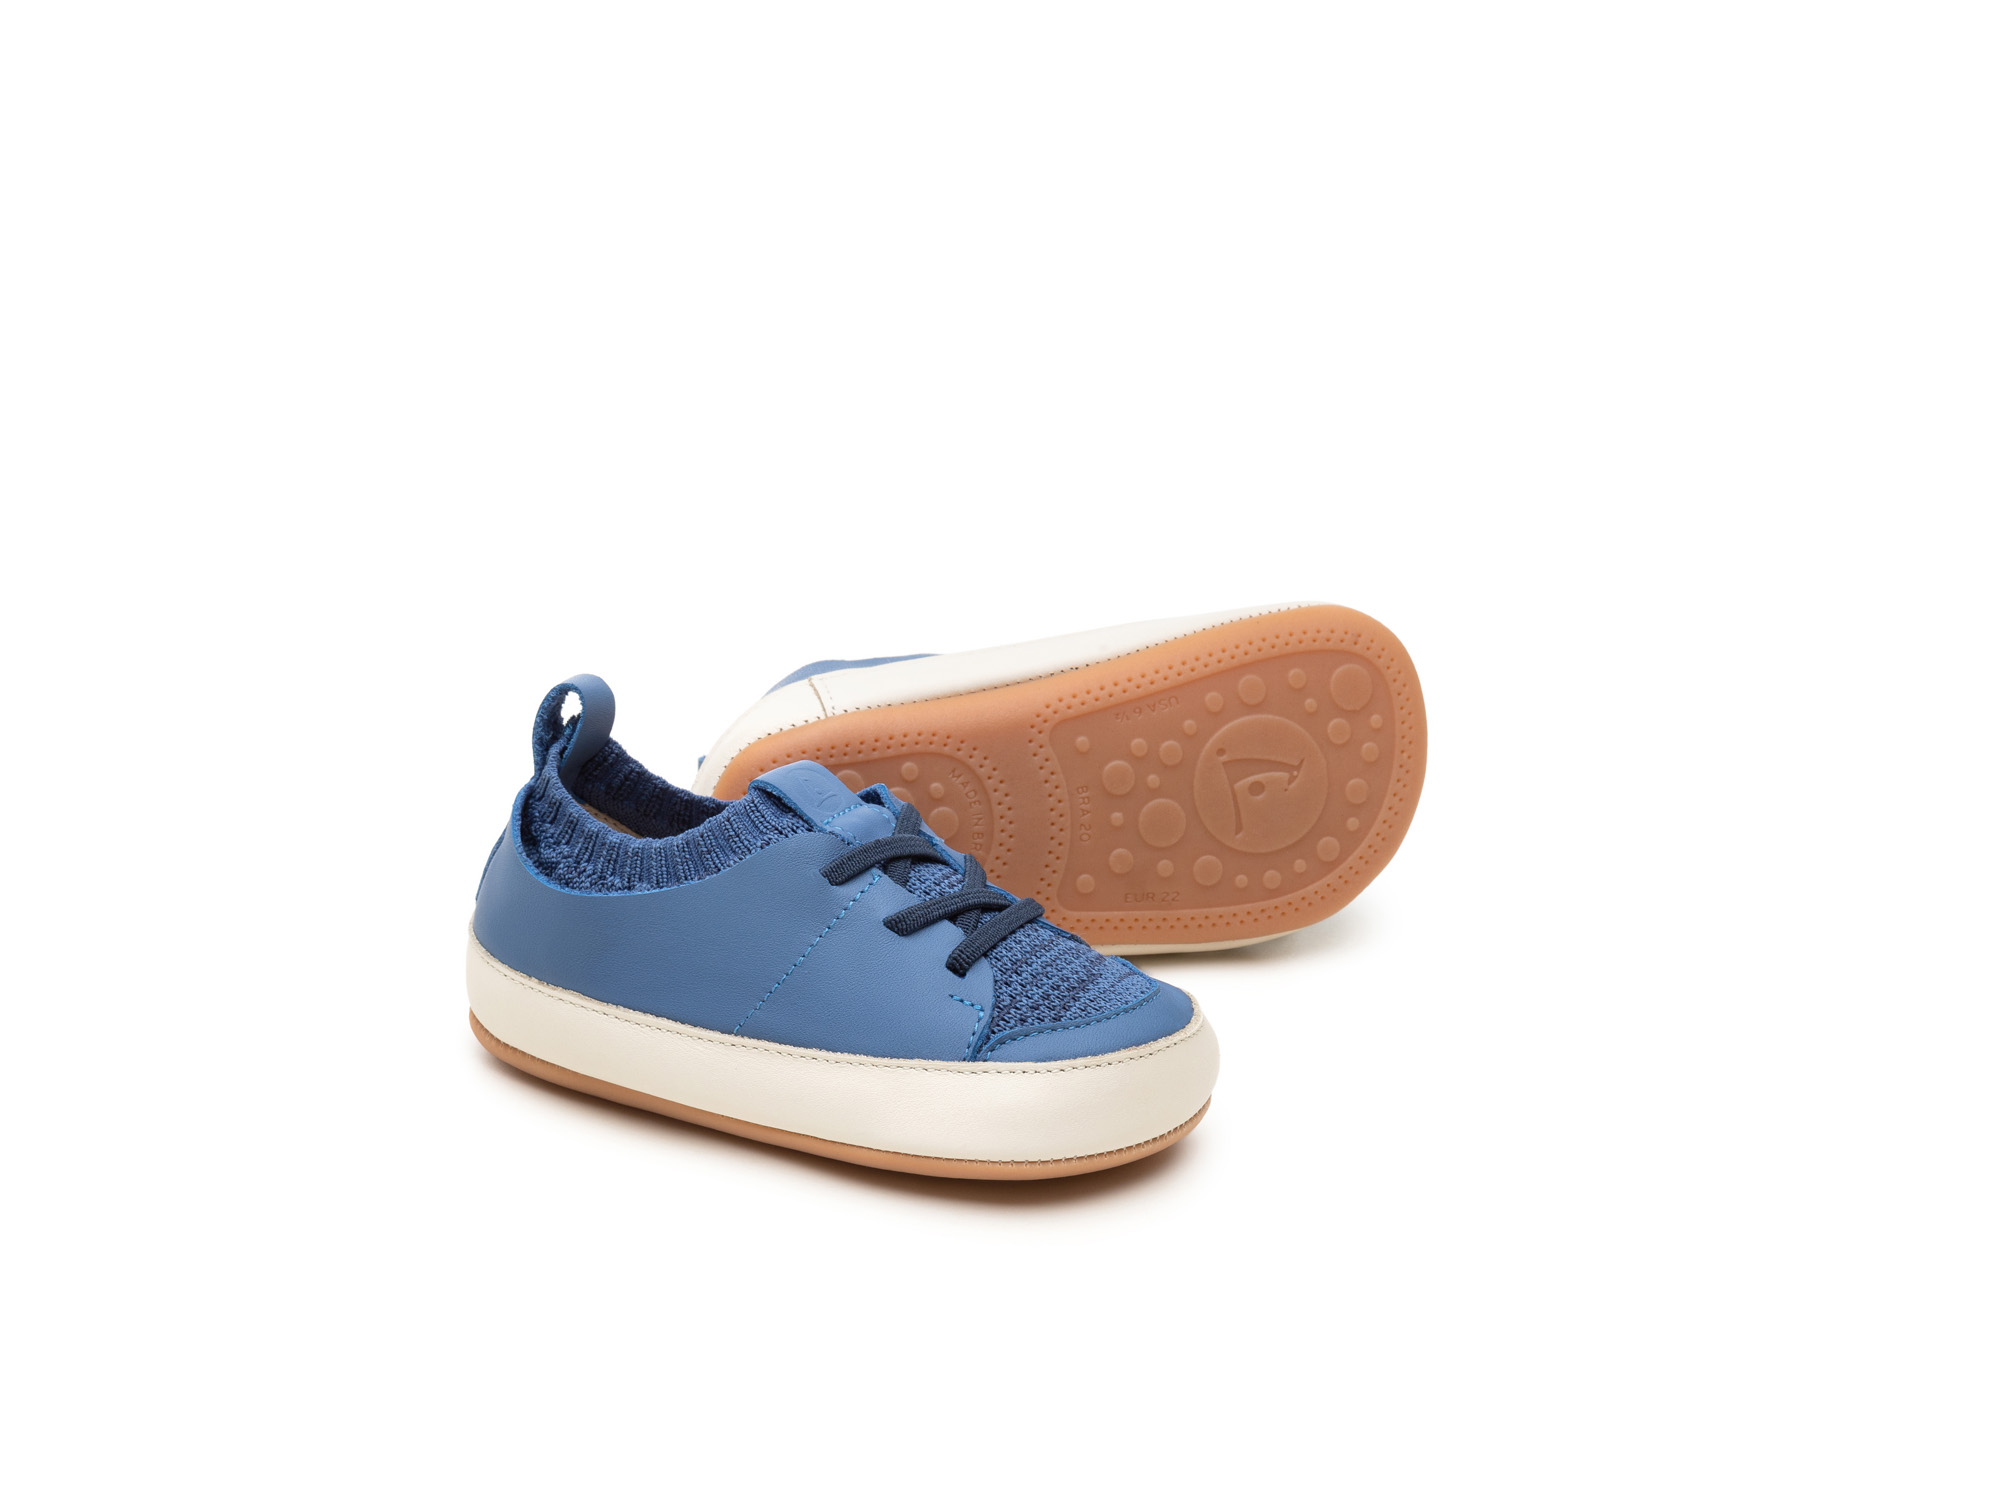 UP & GO Sneakers for Boys Snuggy | Tip Toey Joey - Australia - 0